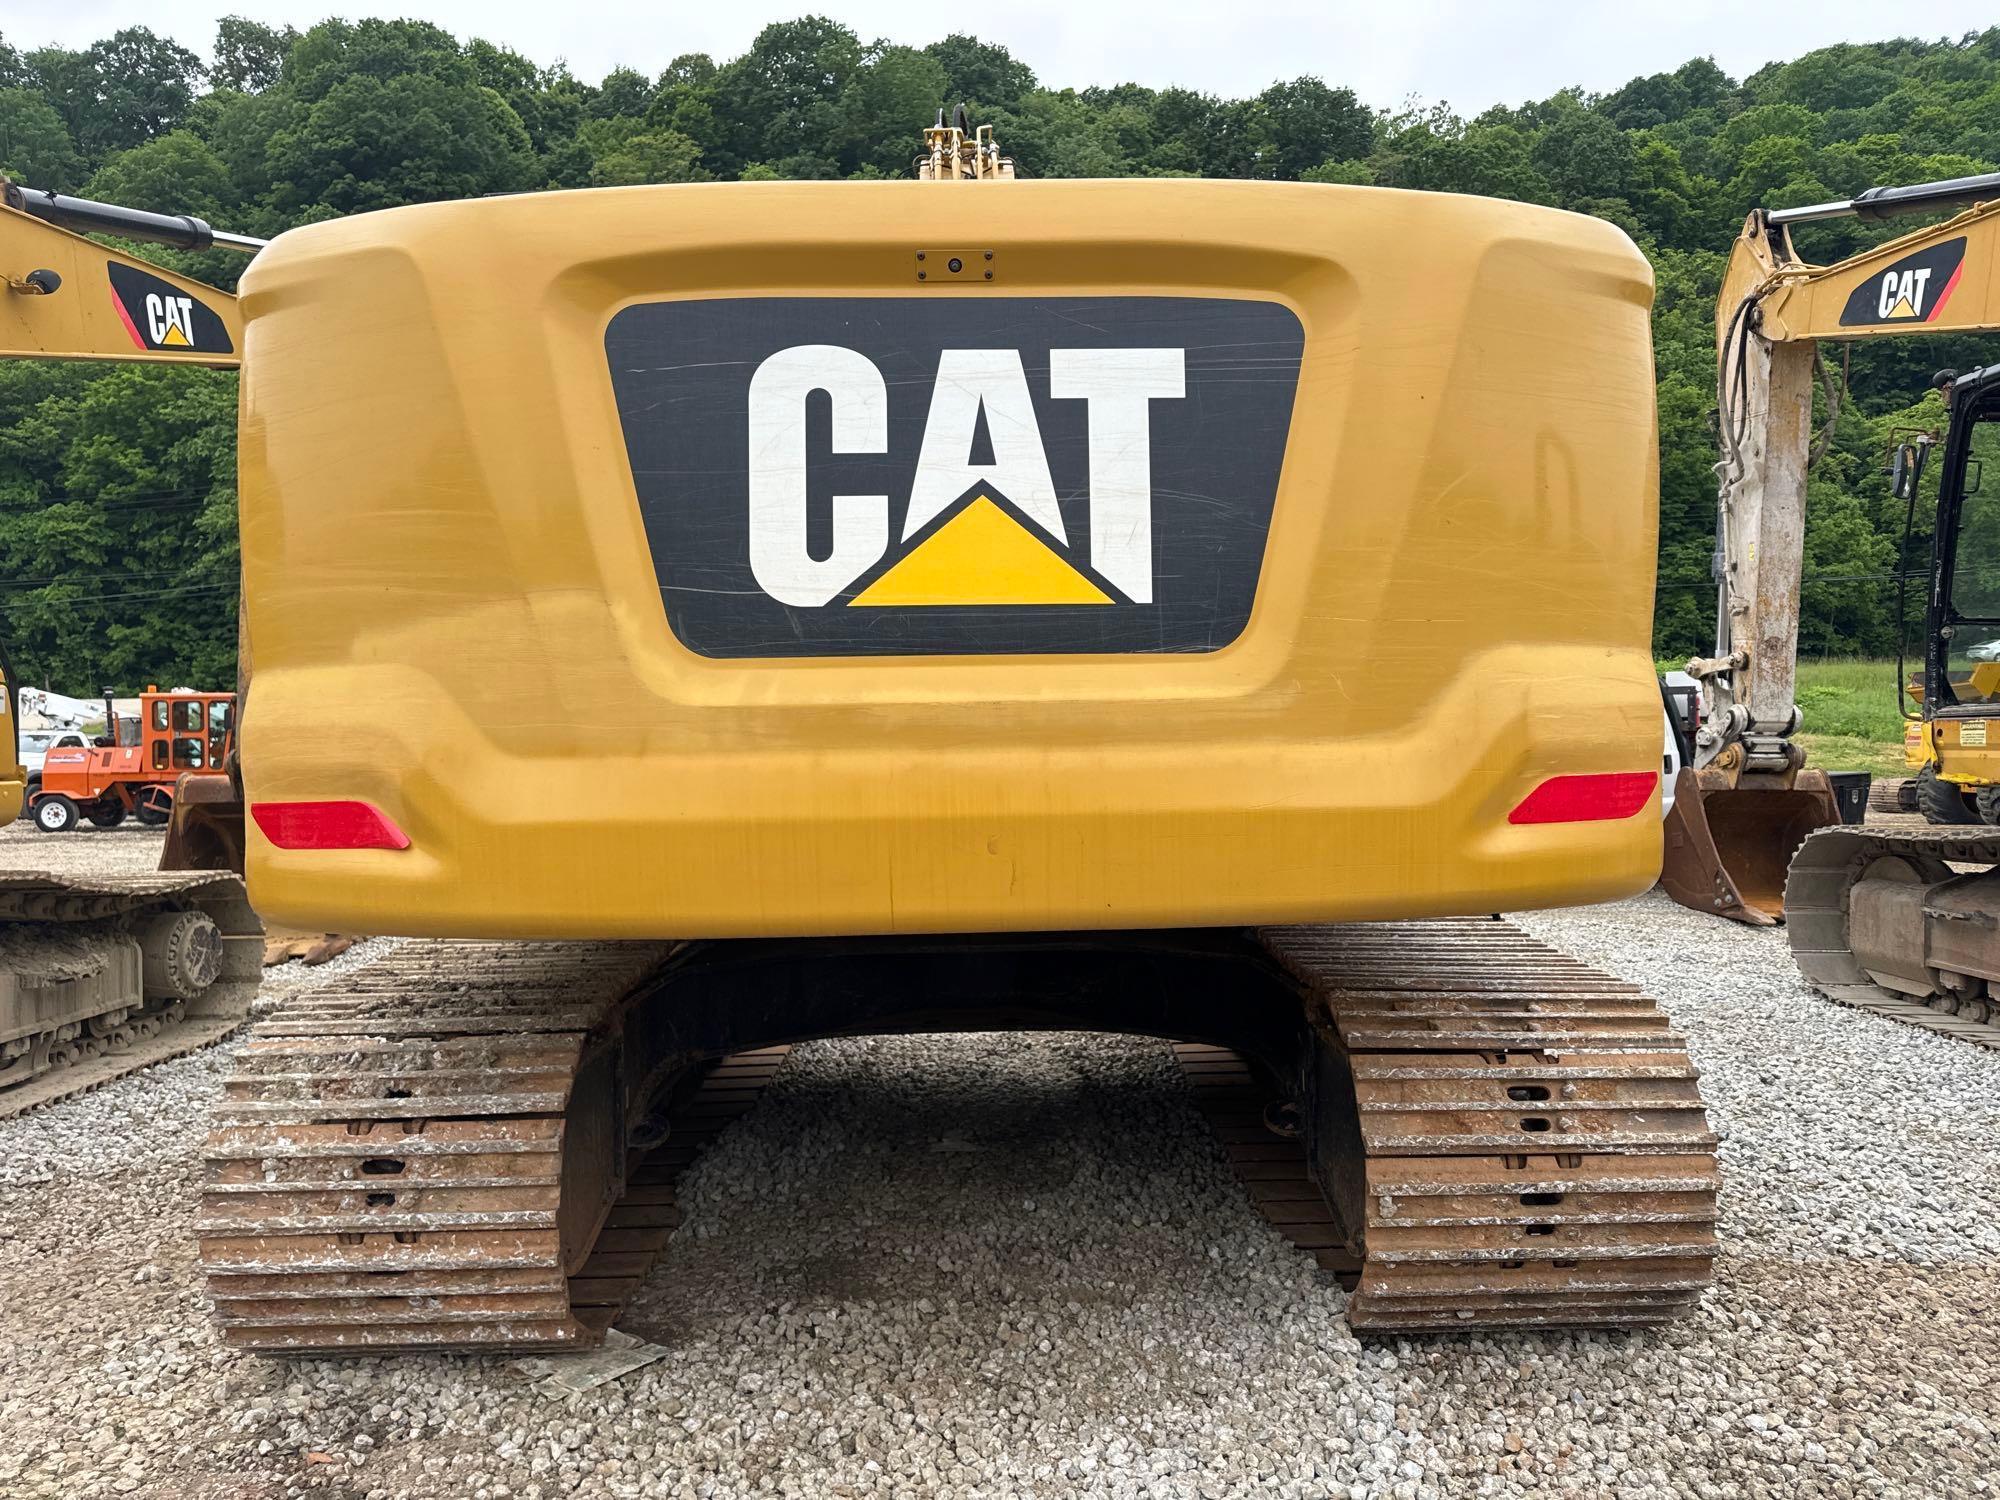 2019 CAT 330 HYDRAULIC EXCAVATOR SN:LHW00970 powered by Cat diesel engine, equipped with Cab, air,